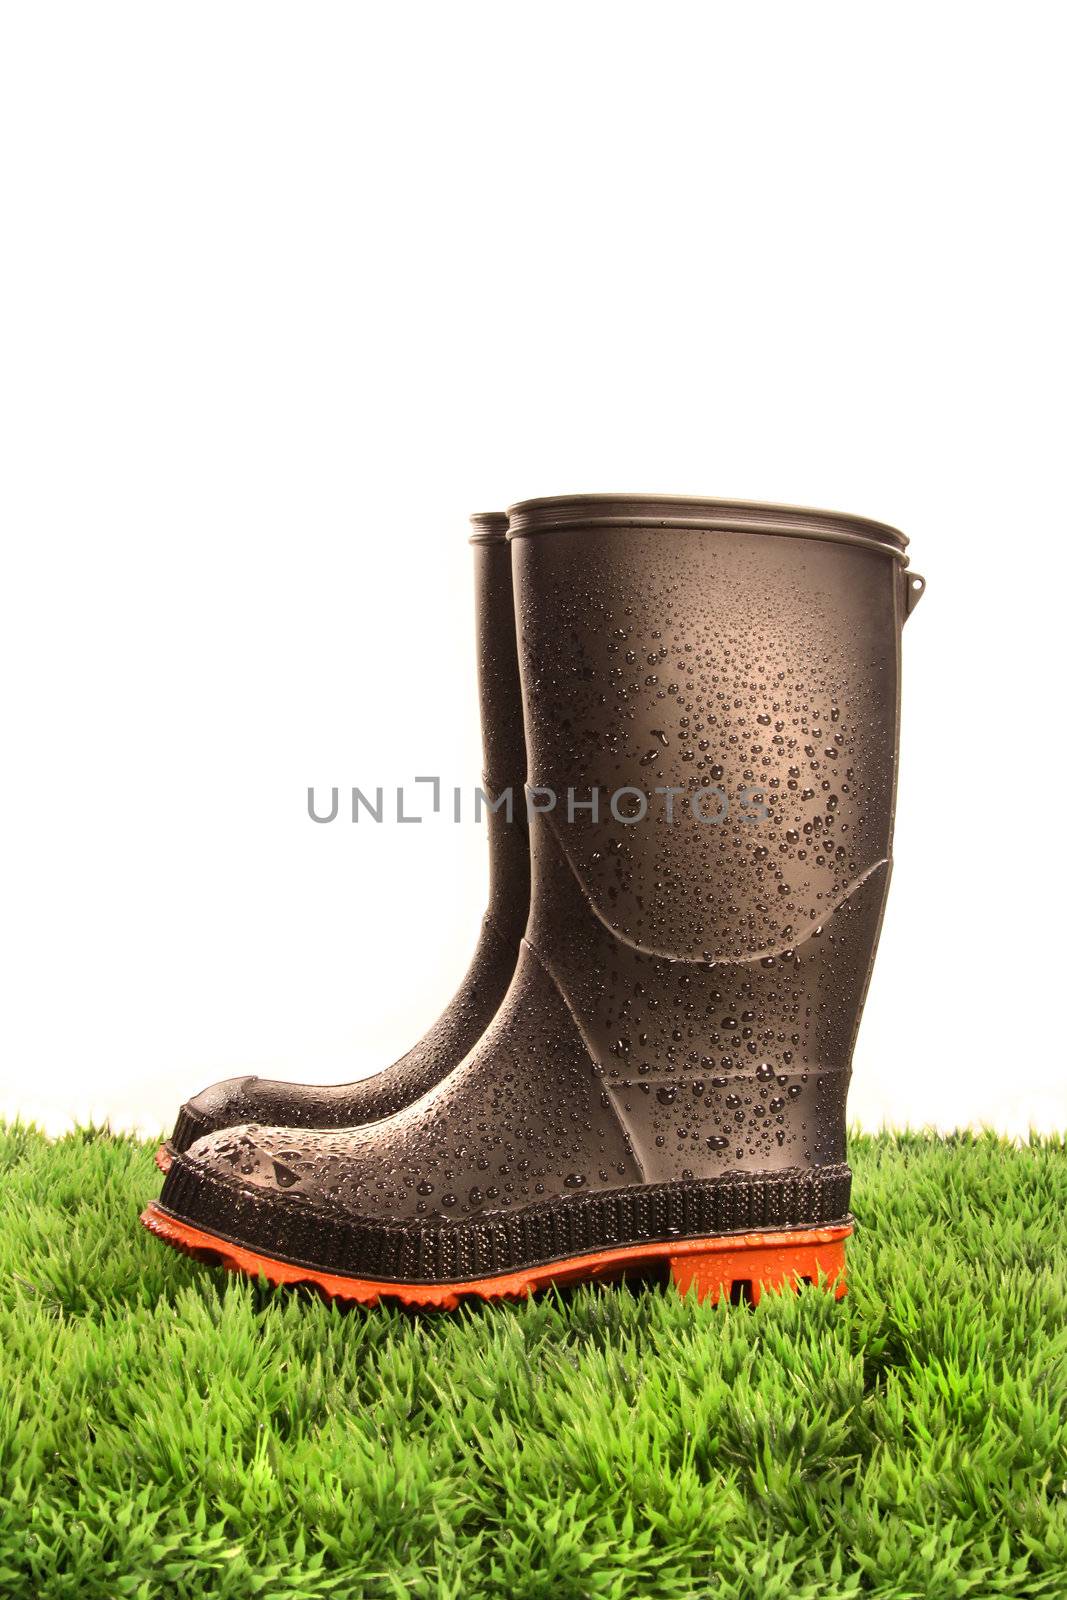 Pair of black rubber boots by Sandralise